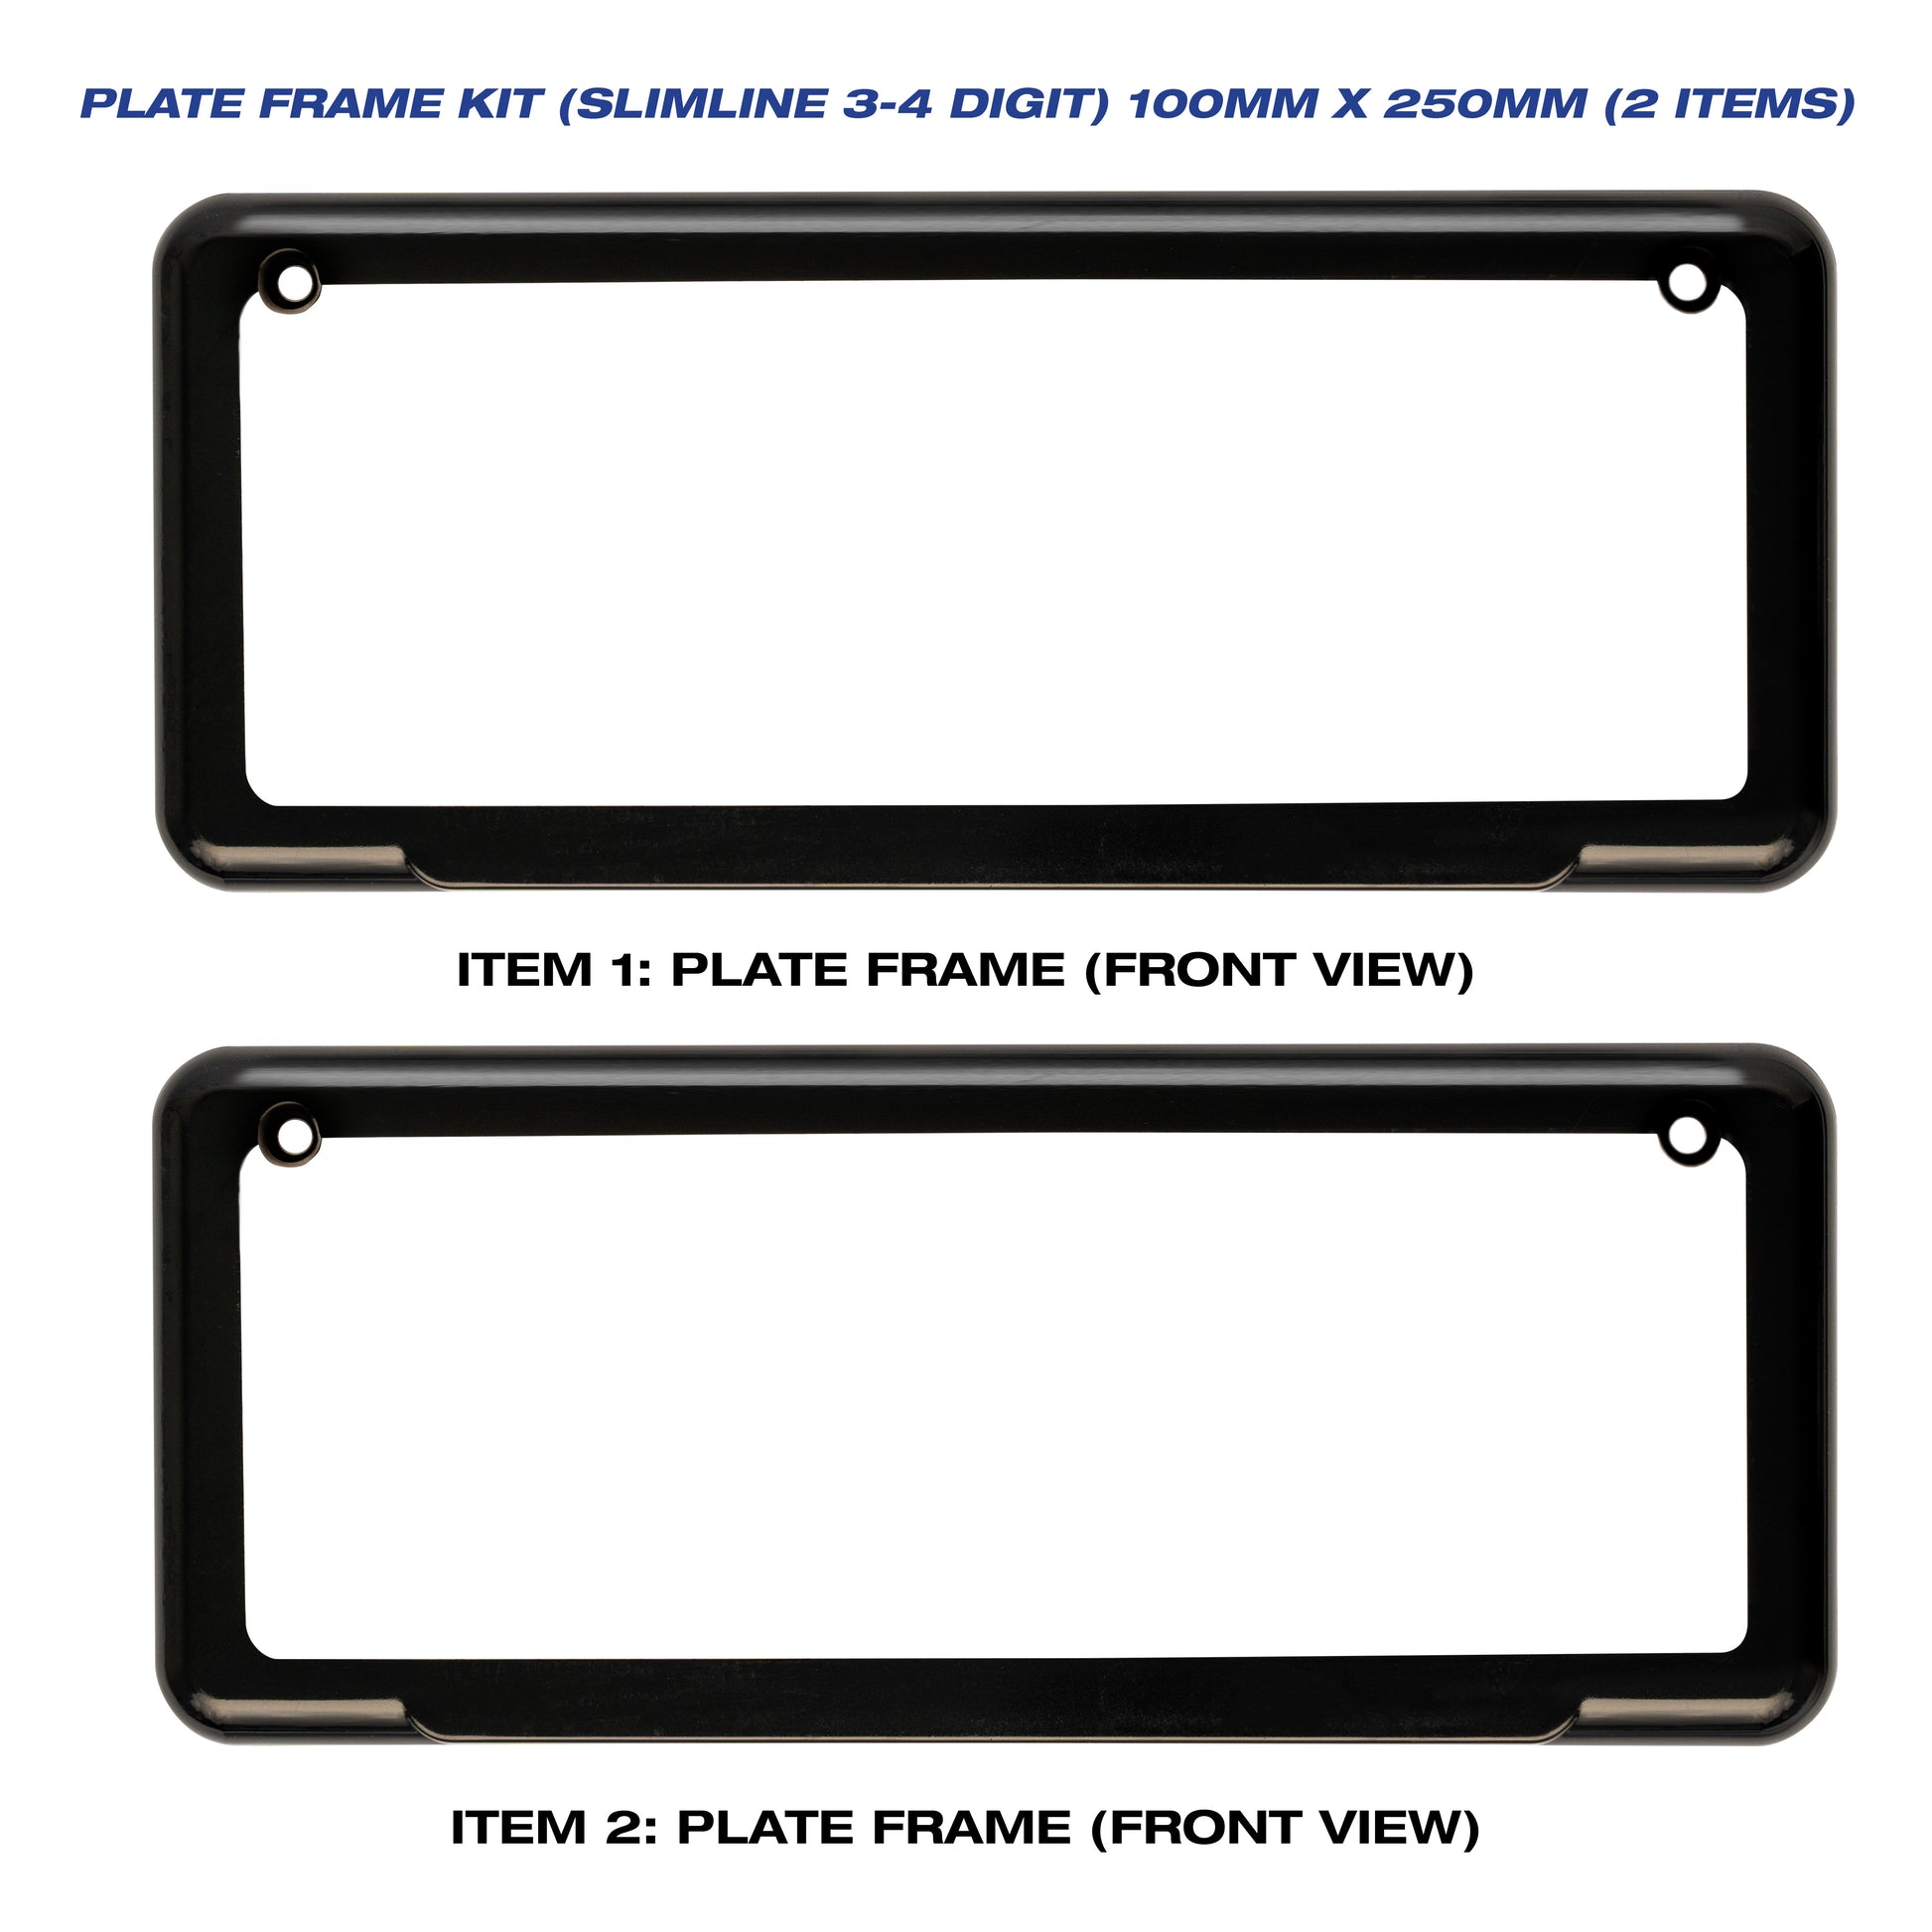 Plate Frame Cover Kit 100mm x 250mm (3 or 4 digit) Suitable for: Victoria. - CUSTOM NUMBER PLATE FRAMES